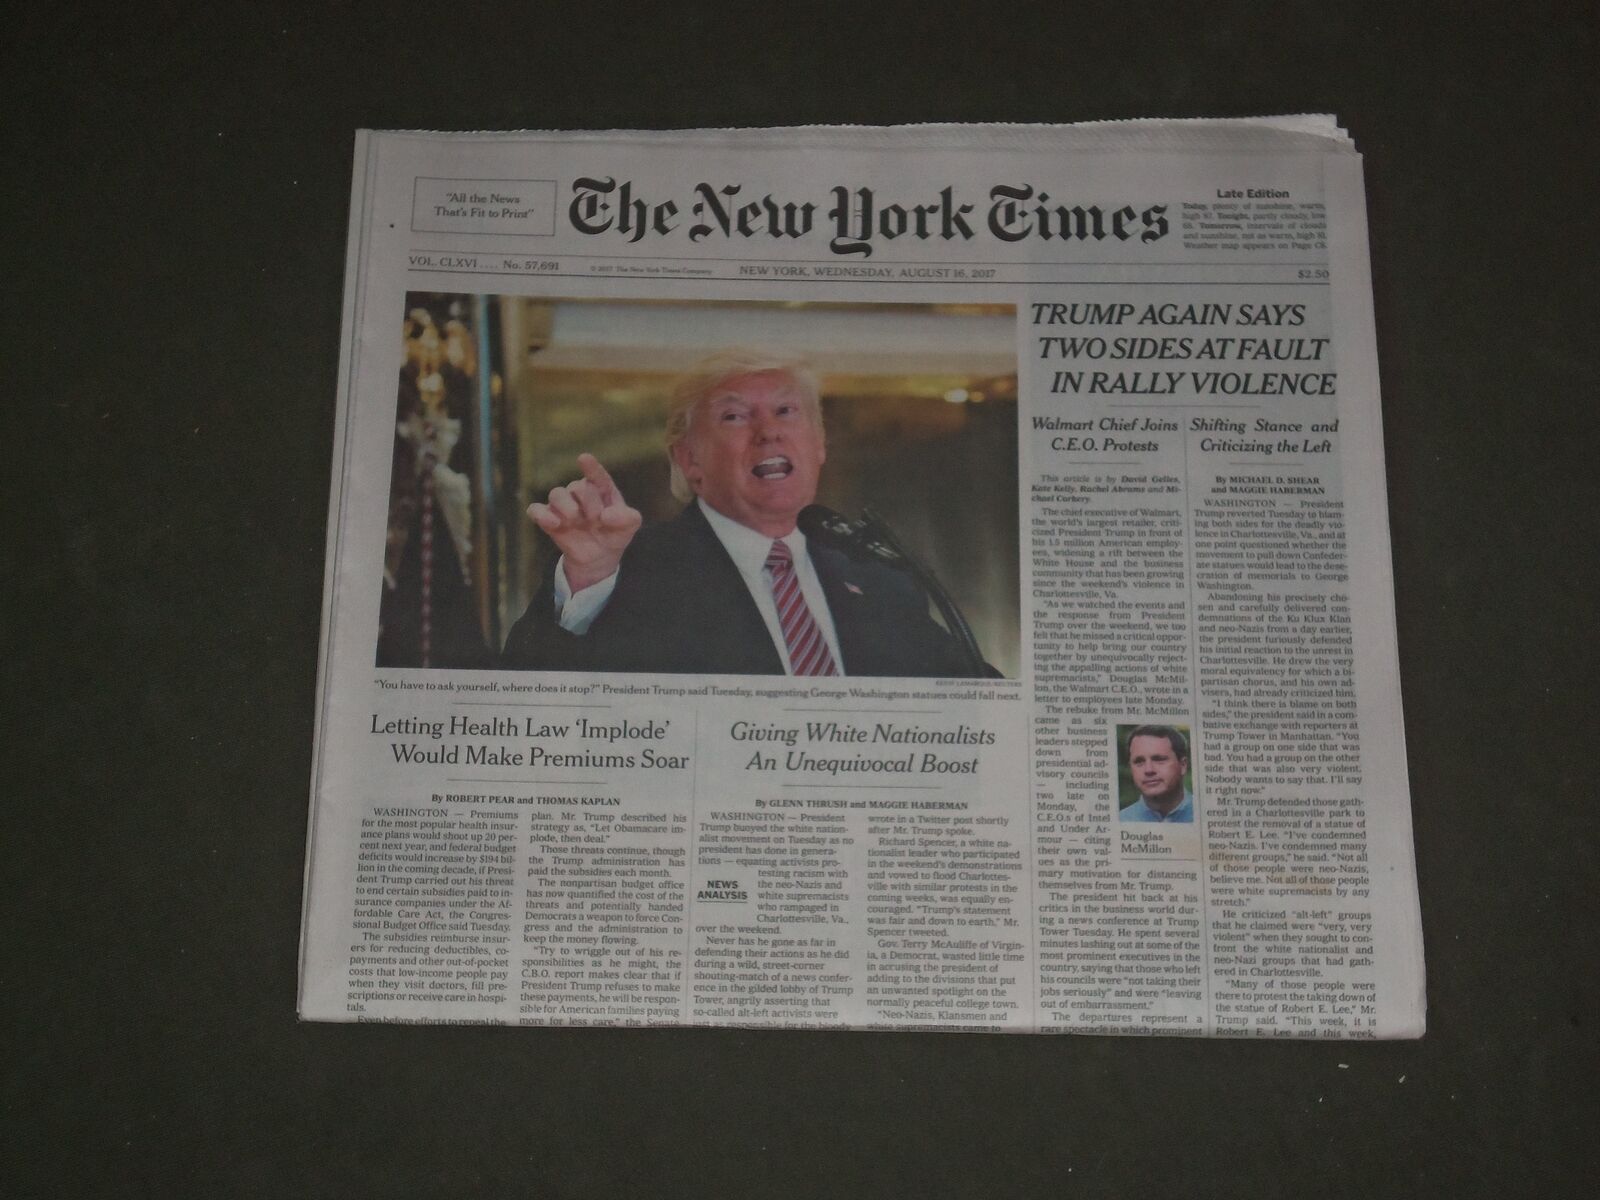 2017 AUGUST 16 NEW YORK TIMES- TRUMP SAYS BOTH SIDES AT FAULT IN CHARLOTTESVILLE